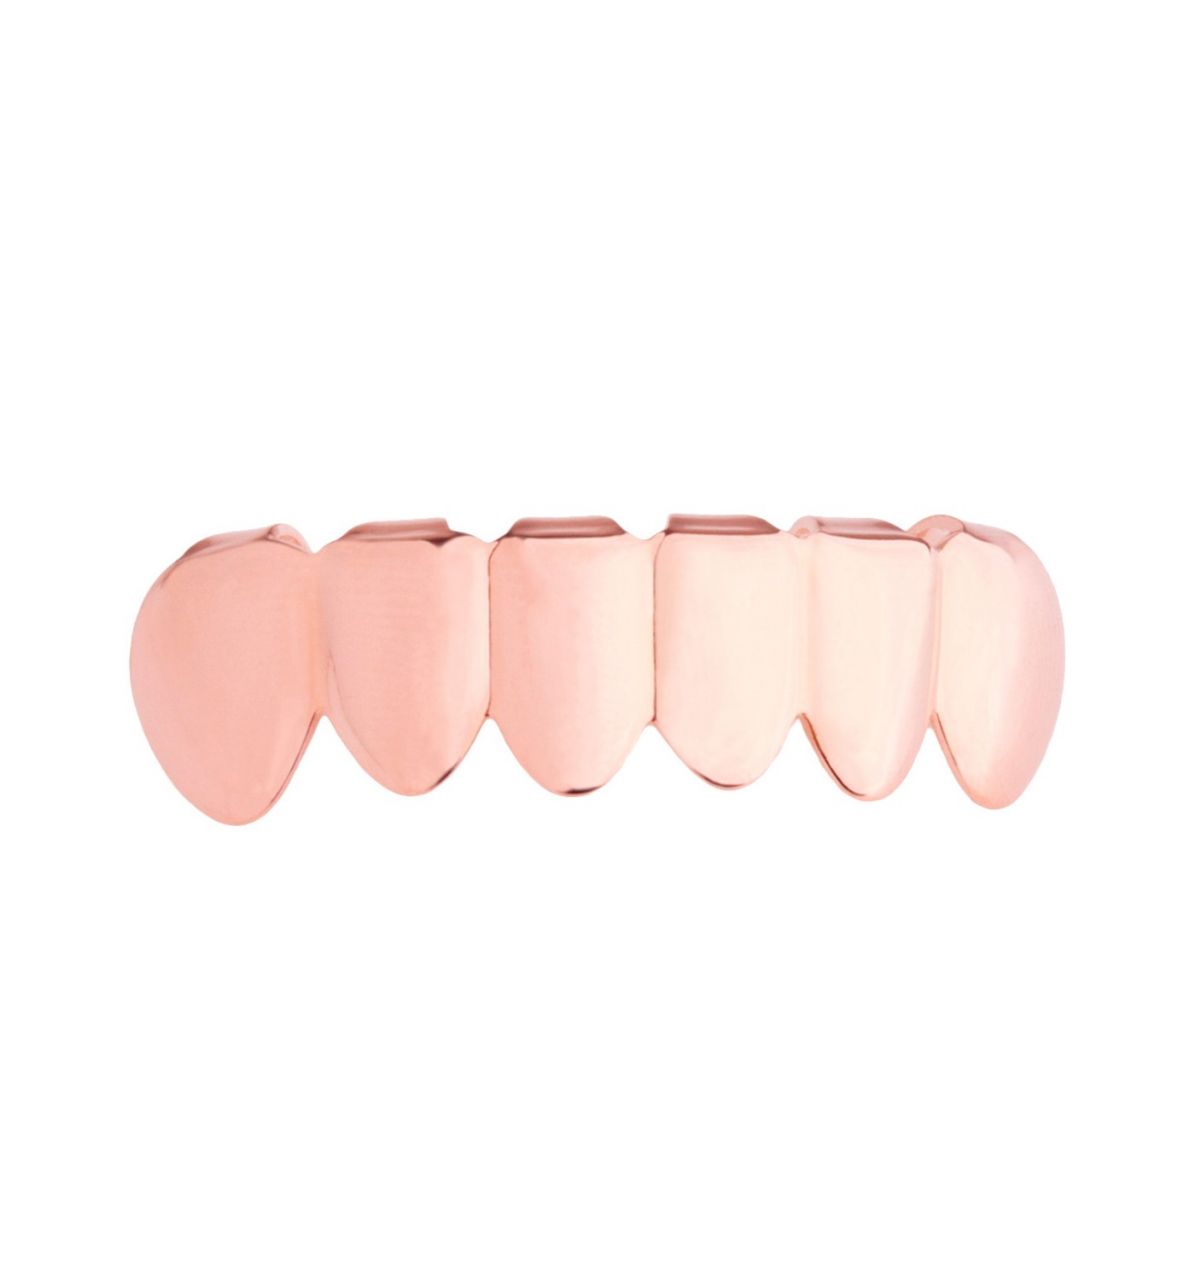 Grillz – Rose Gold – One size fits all – BOTTOM